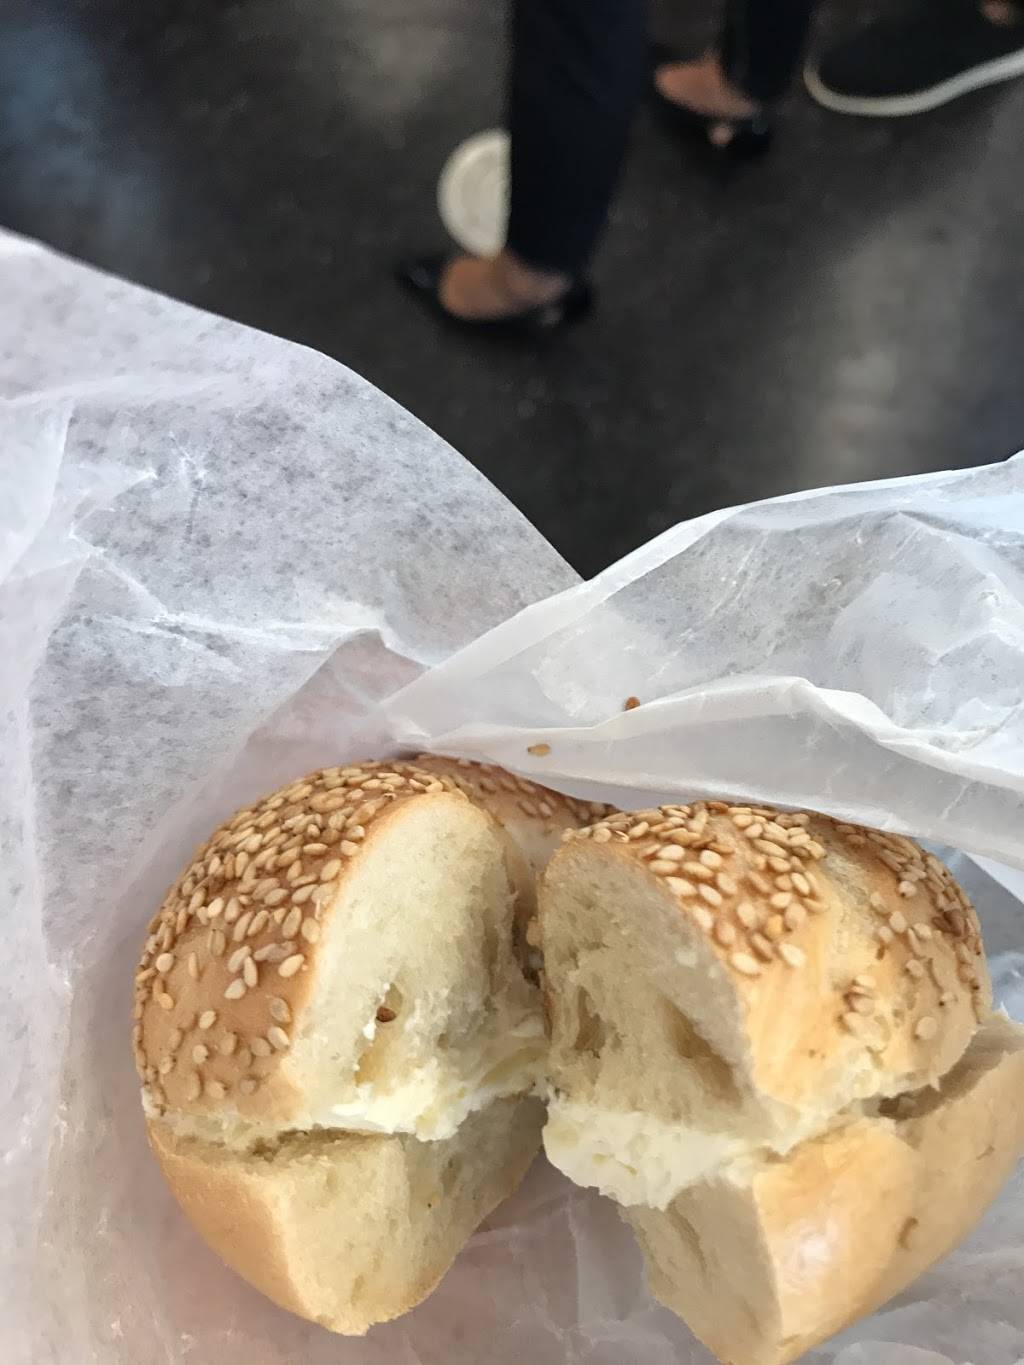 Have A Bagel | cafe | 197 Havemeyer St, Brooklyn, NY 11211, USA | 7187820111 OR +1 718-782-0111